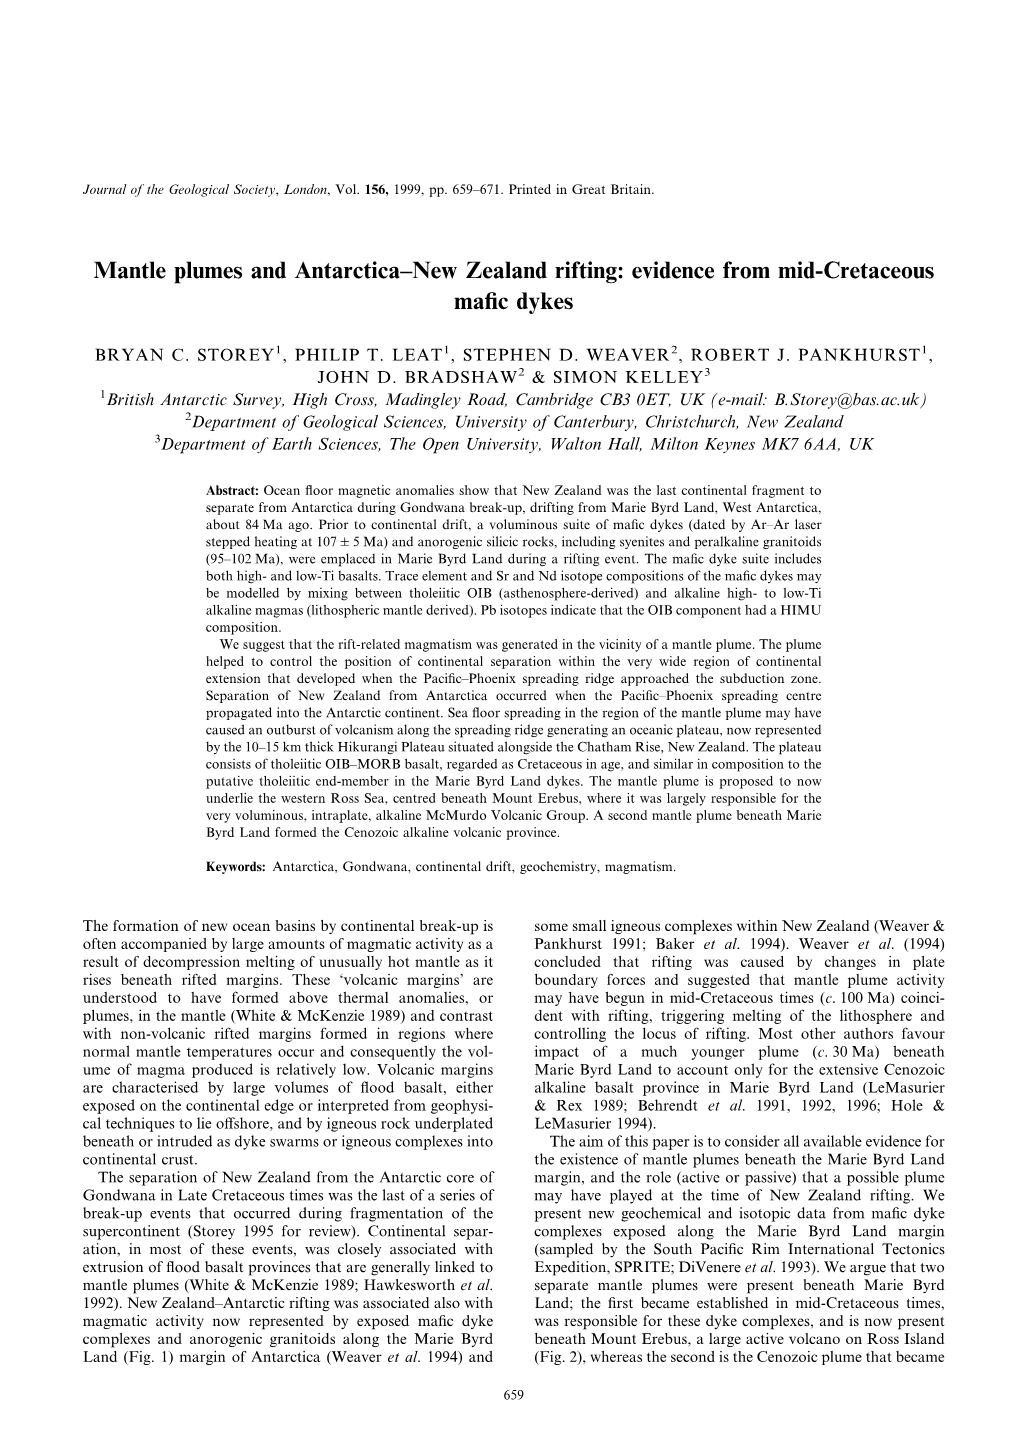 Mantle Plumes and Antarctica–New Zealand Rifting: Evidence from Mid-Cretaceous Maﬁc Dykes